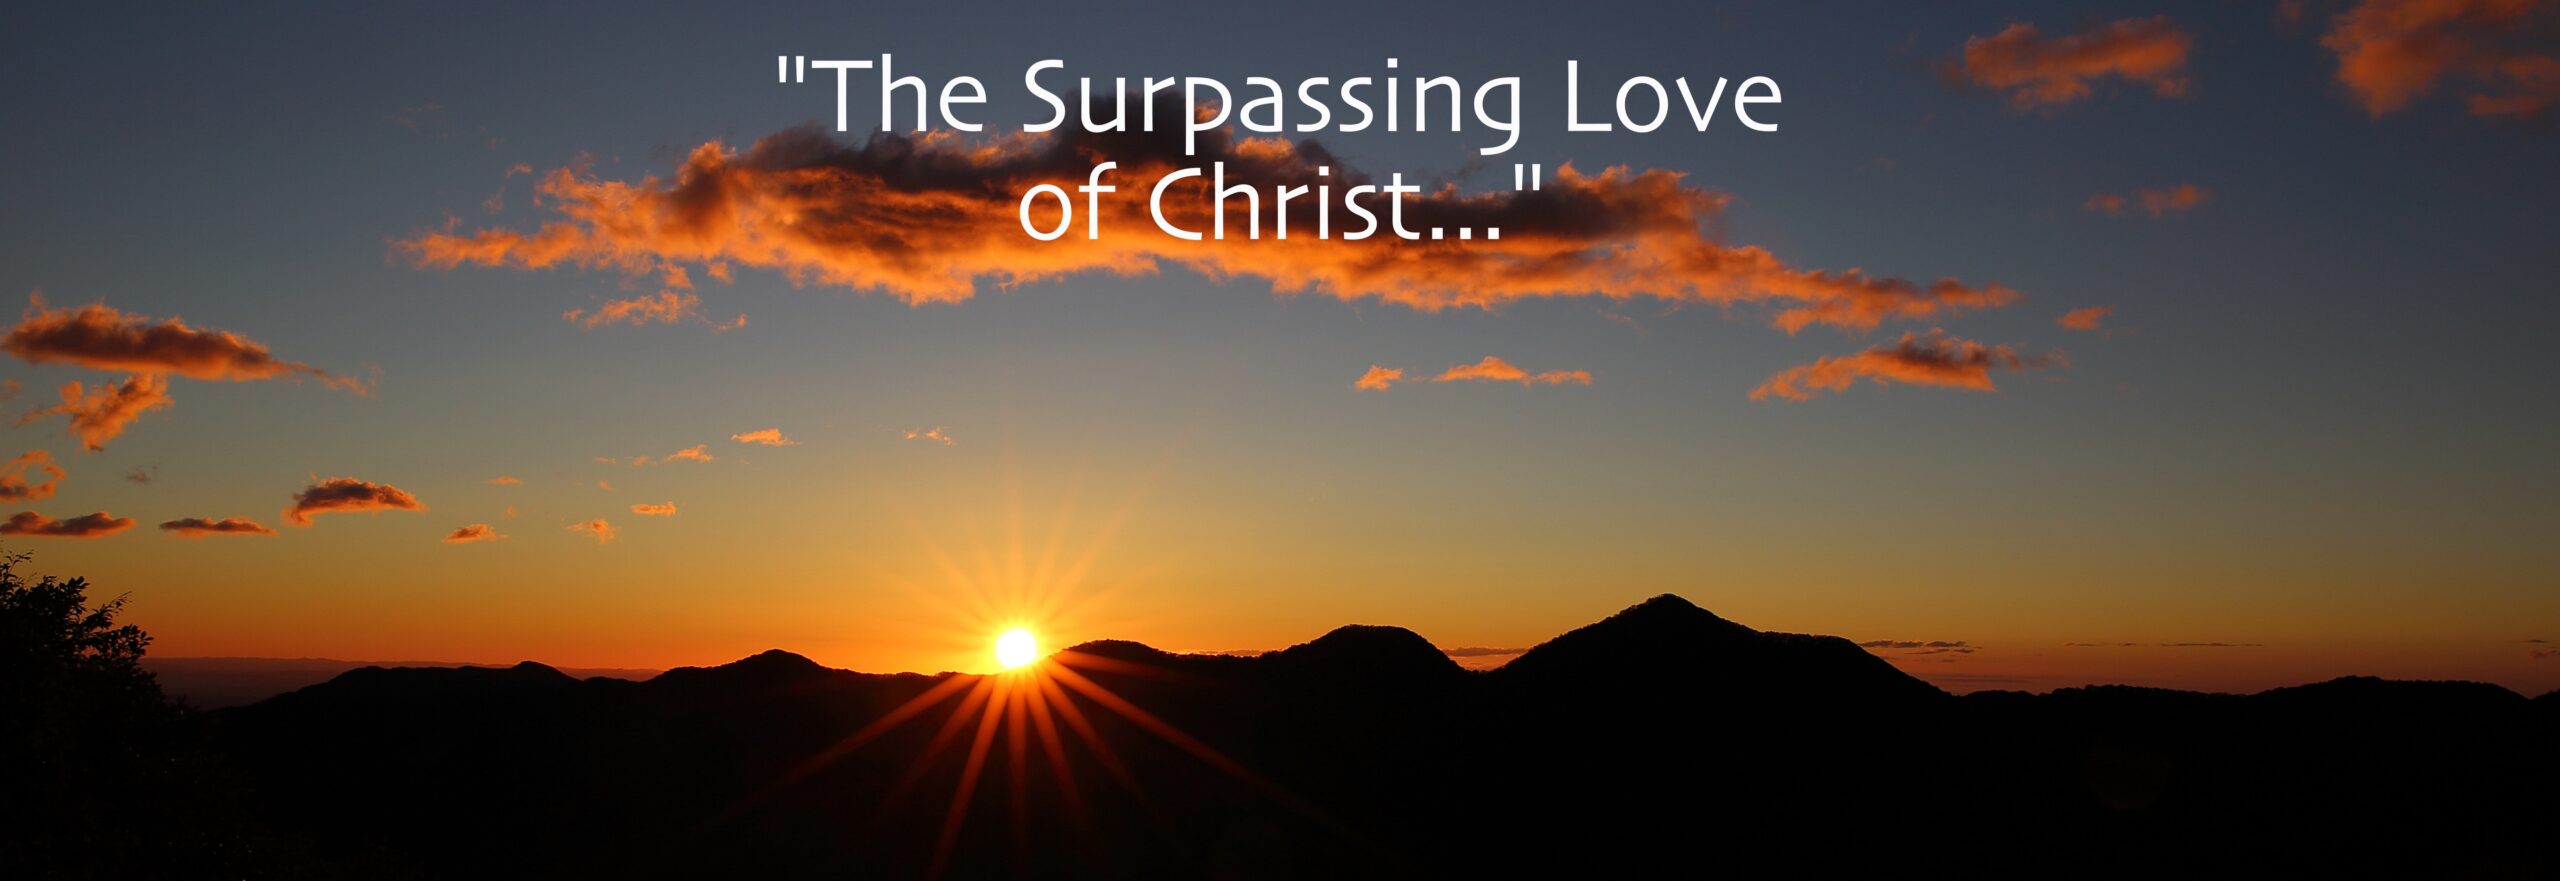 the surpassing love of Christ